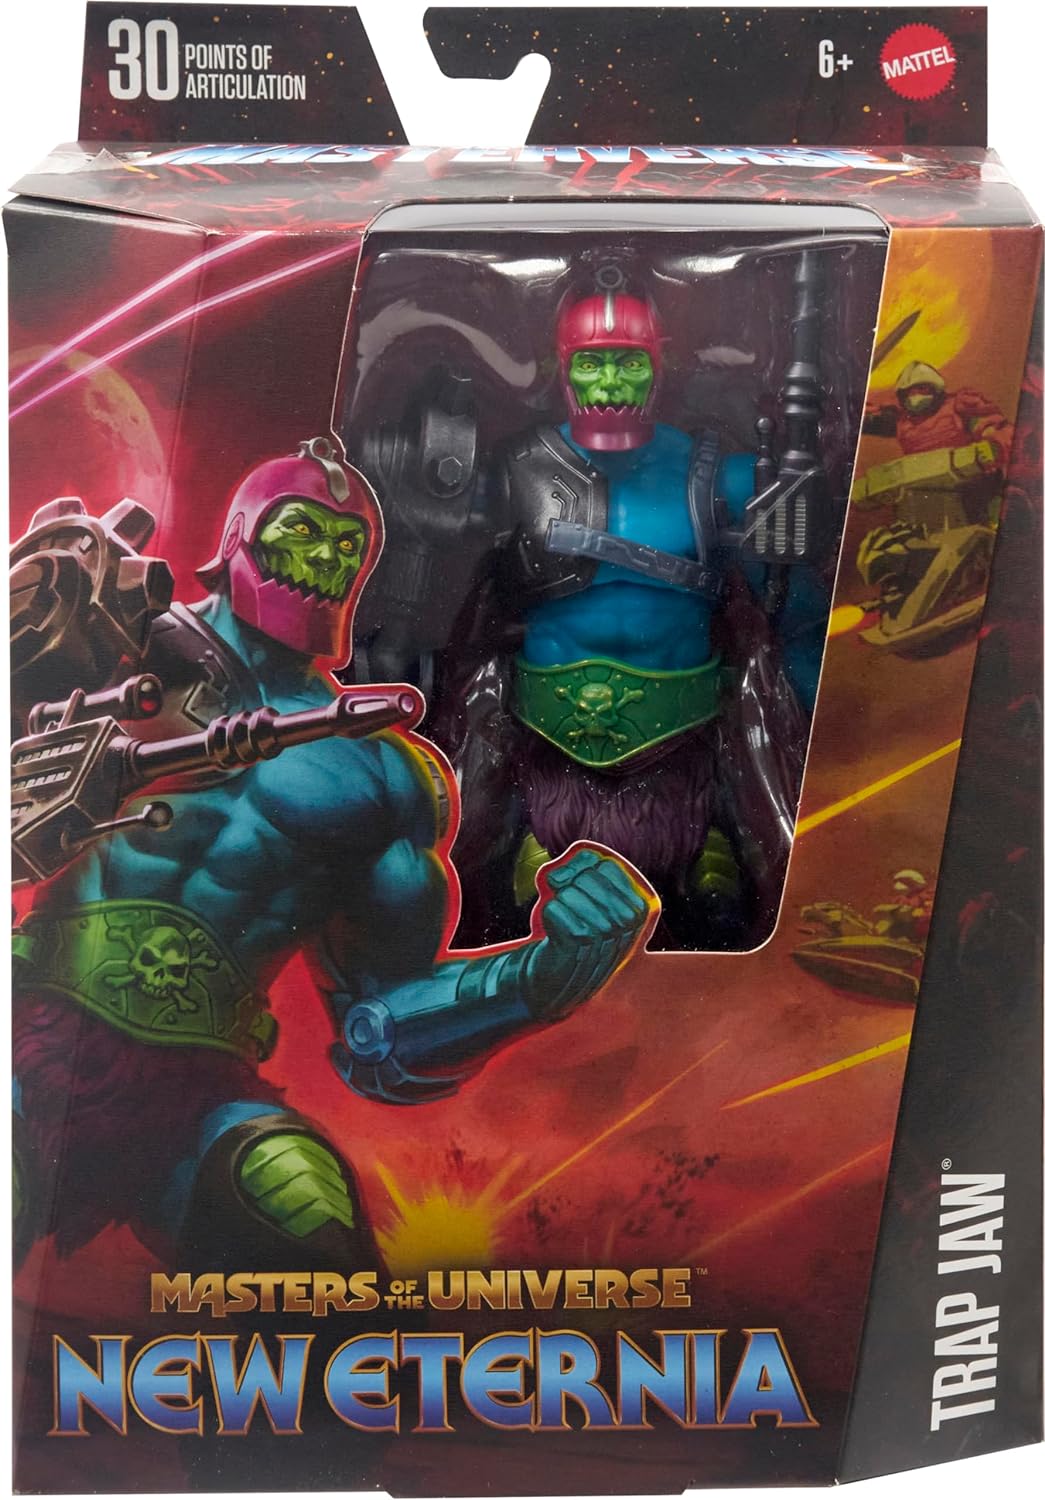 https://www.actionfigure411.com/masters-of-the-universe/images/trap-jaw-7321.jpg